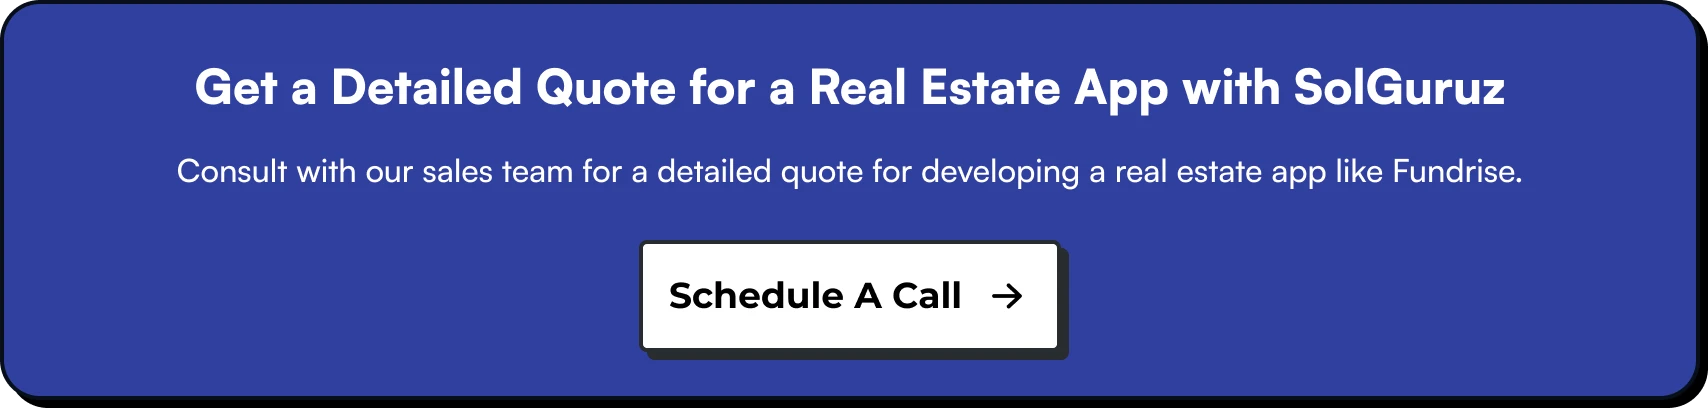 Get a Detailed Quote for a Real Estate App with SolGuruz